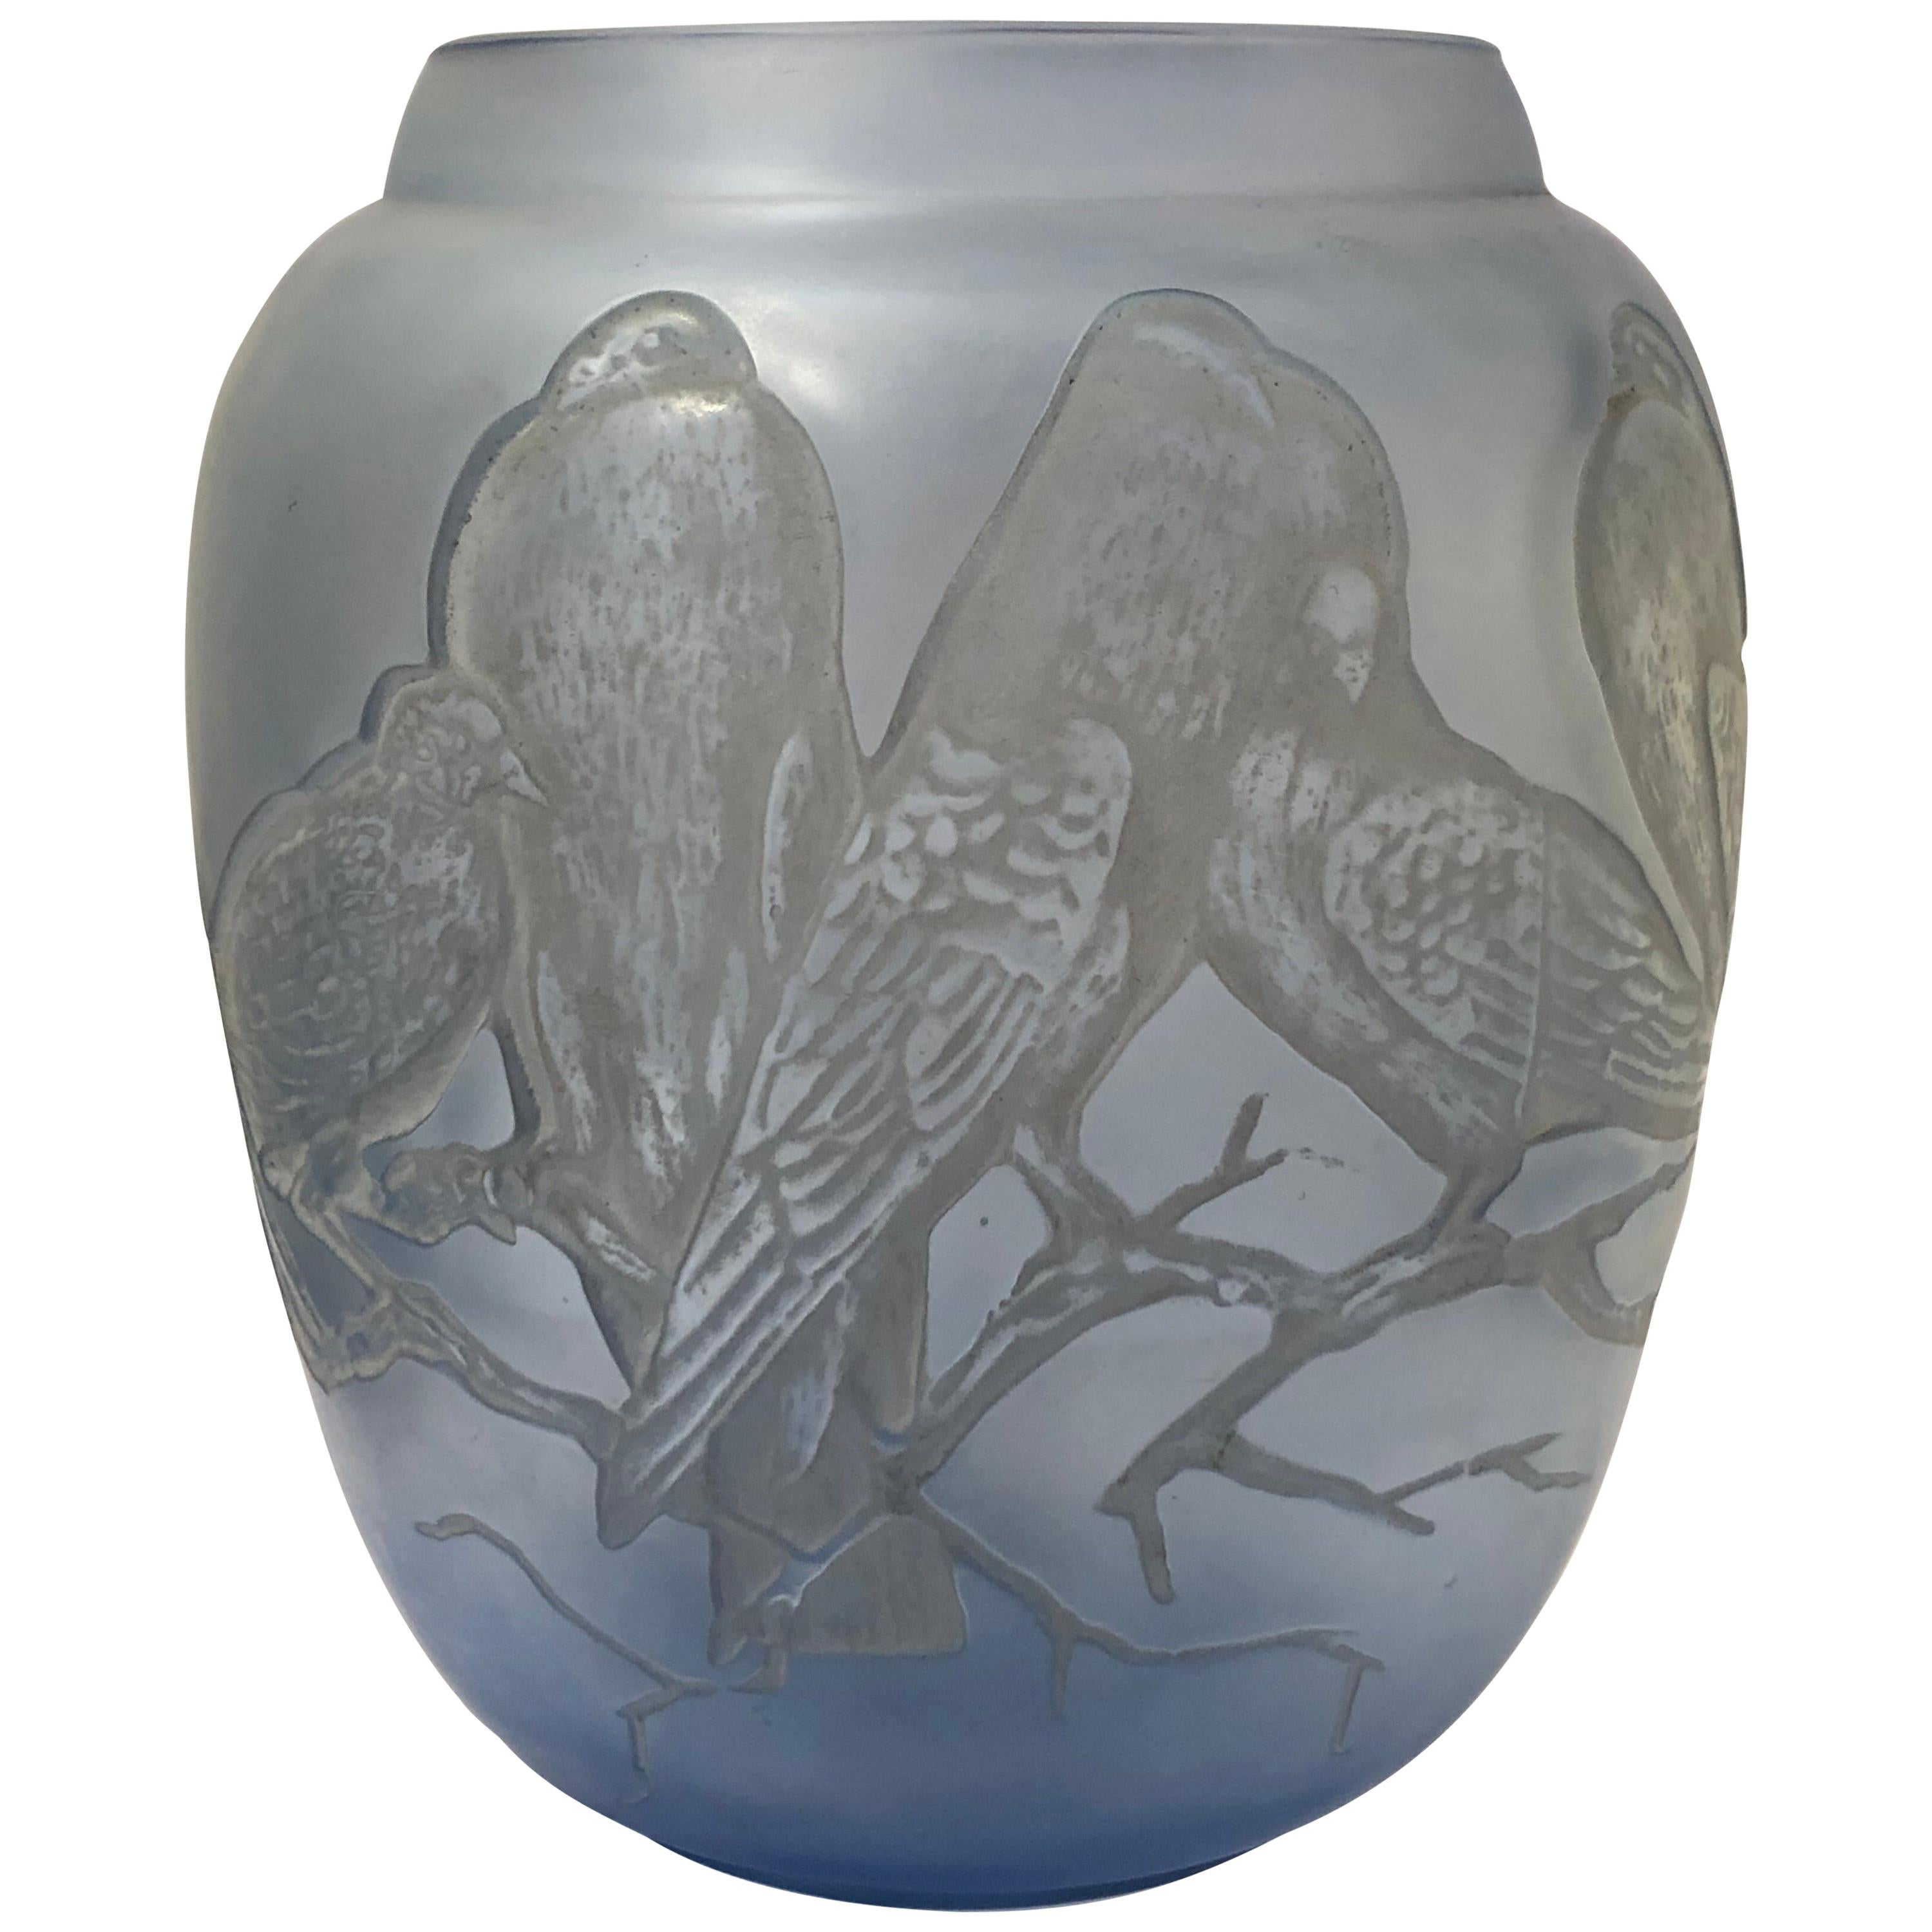 1924 René Lalique Pigeons Vase in Light Blue Glass with White Patina, Birds